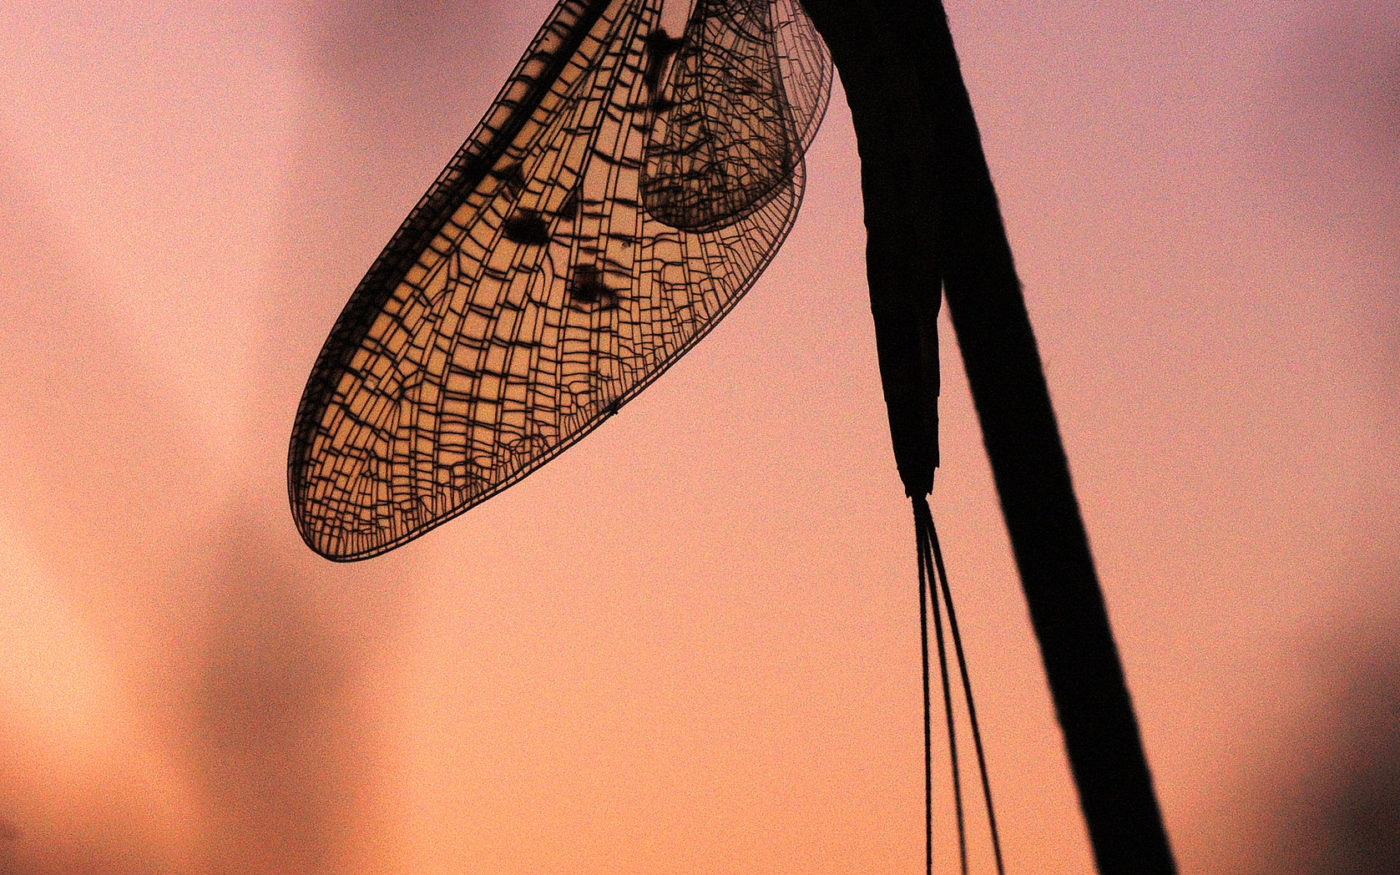 Adult mayfly at sunset